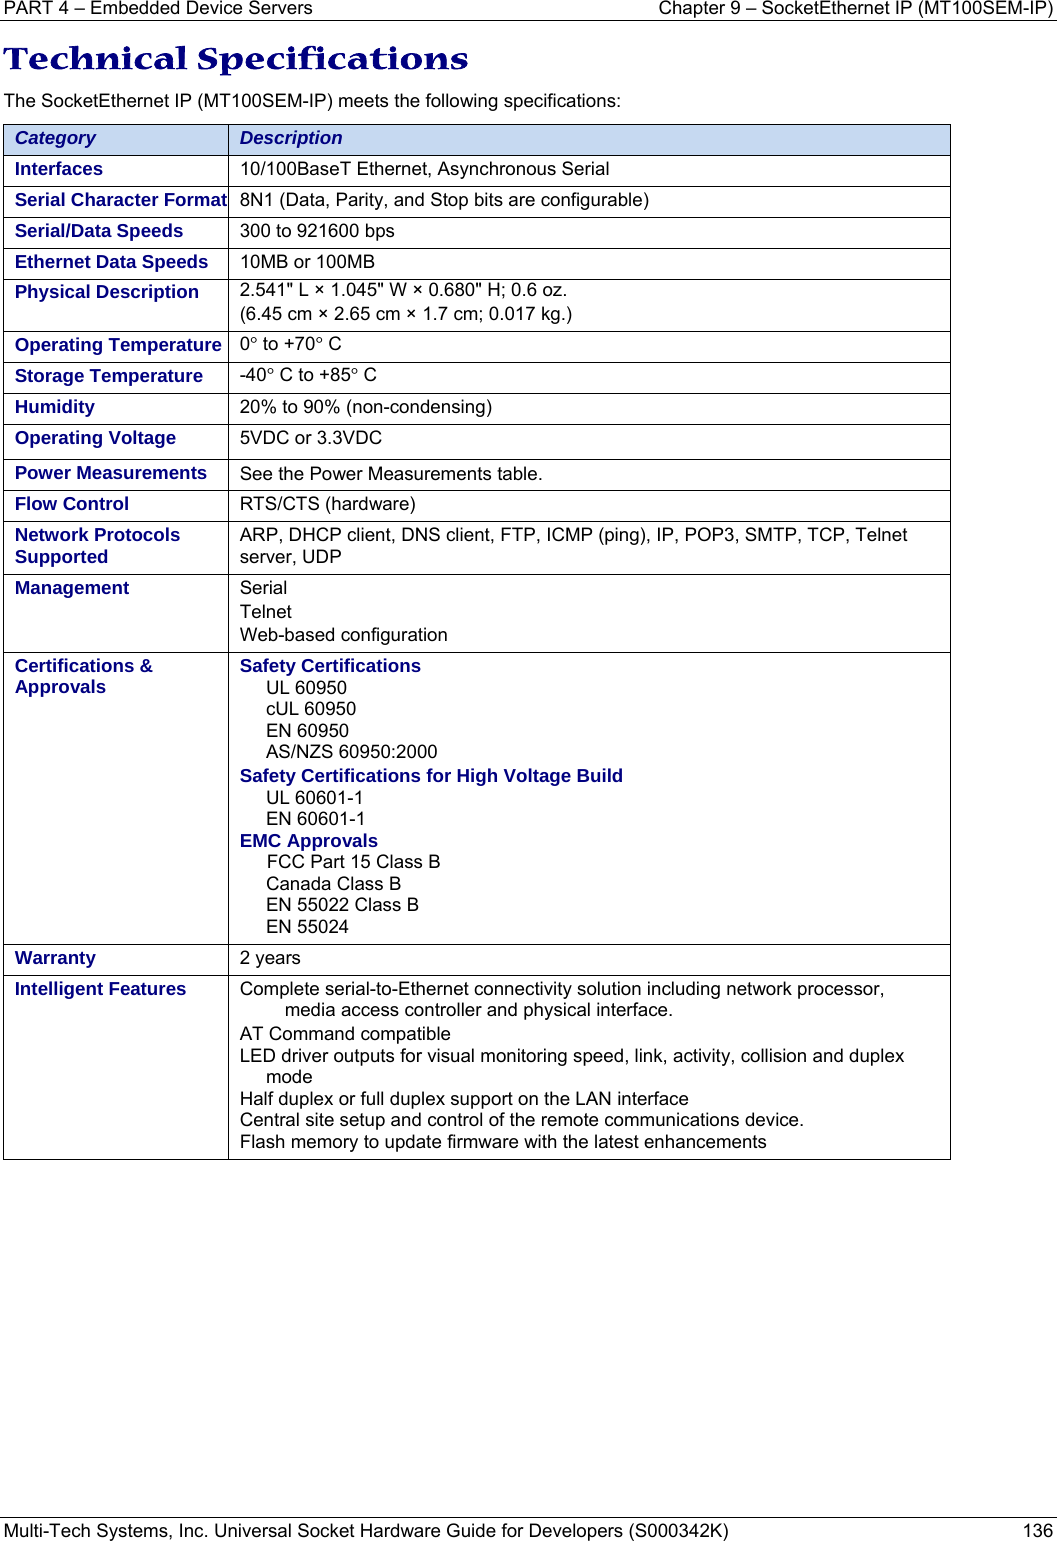 PART 4 – Embedded Device Servers  Chapter 9 – SocketEthernet IP (MT100SEM-IP)  Multi-Tech Systems, Inc. Universal Socket Hardware Guide for Developers (S000342K)  136  Technical Specifications The SocketEthernet IP (MT100SEM-IP) meets the following specifications: Category  Description Interfaces  10/100BaseT Ethernet, Asynchronous Serial Serial Character Format  8N1 (Data, Parity, and Stop bits are configurable) Serial/Data Speeds  300 to 921600 bps Ethernet Data Speeds  10MB or 100MB Physical Description  2.541&quot; L × 1.045&quot; W × 0.680&quot; H; 0.6 oz. (6.45 cm × 2.65 cm × 1.7 cm; 0.017 kg.) Operating Temperature  0° to +70° C  Storage Temperature  -40° C to +85° C Humidity  20% to 90% (non-condensing) Operating Voltage   5VDC or 3.3VDC Power Measurements  See the Power Measurements table.  Flow Control  RTS/CTS (hardware) Network Protocols Supported  ARP, DHCP client, DNS client, FTP, ICMP (ping), IP, POP3, SMTP, TCP, Telnet server, UDP Management  Serial  Telnet  Web-based configuration  Certifications &amp; Approvals  Safety Certifications UL 60950 cUL 60950 EN 60950 AS/NZS 60950:2000  Safety Certifications for High Voltage Build UL 60601-1 EN 60601-1 EMC Approvals FCC Part 15 Class B Canada Class B EN 55022 Class B EN 55024 Warranty  2 years Intelligent Features  Complete serial-to-Ethernet connectivity solution including network processor, media access controller and physical interface. AT Command compatible  LED driver outputs for visual monitoring speed, link, activity, collision and duplex mode Half duplex or full duplex support on the LAN interface Central site setup and control of the remote communications device.  Flash memory to update firmware with the latest enhancements    